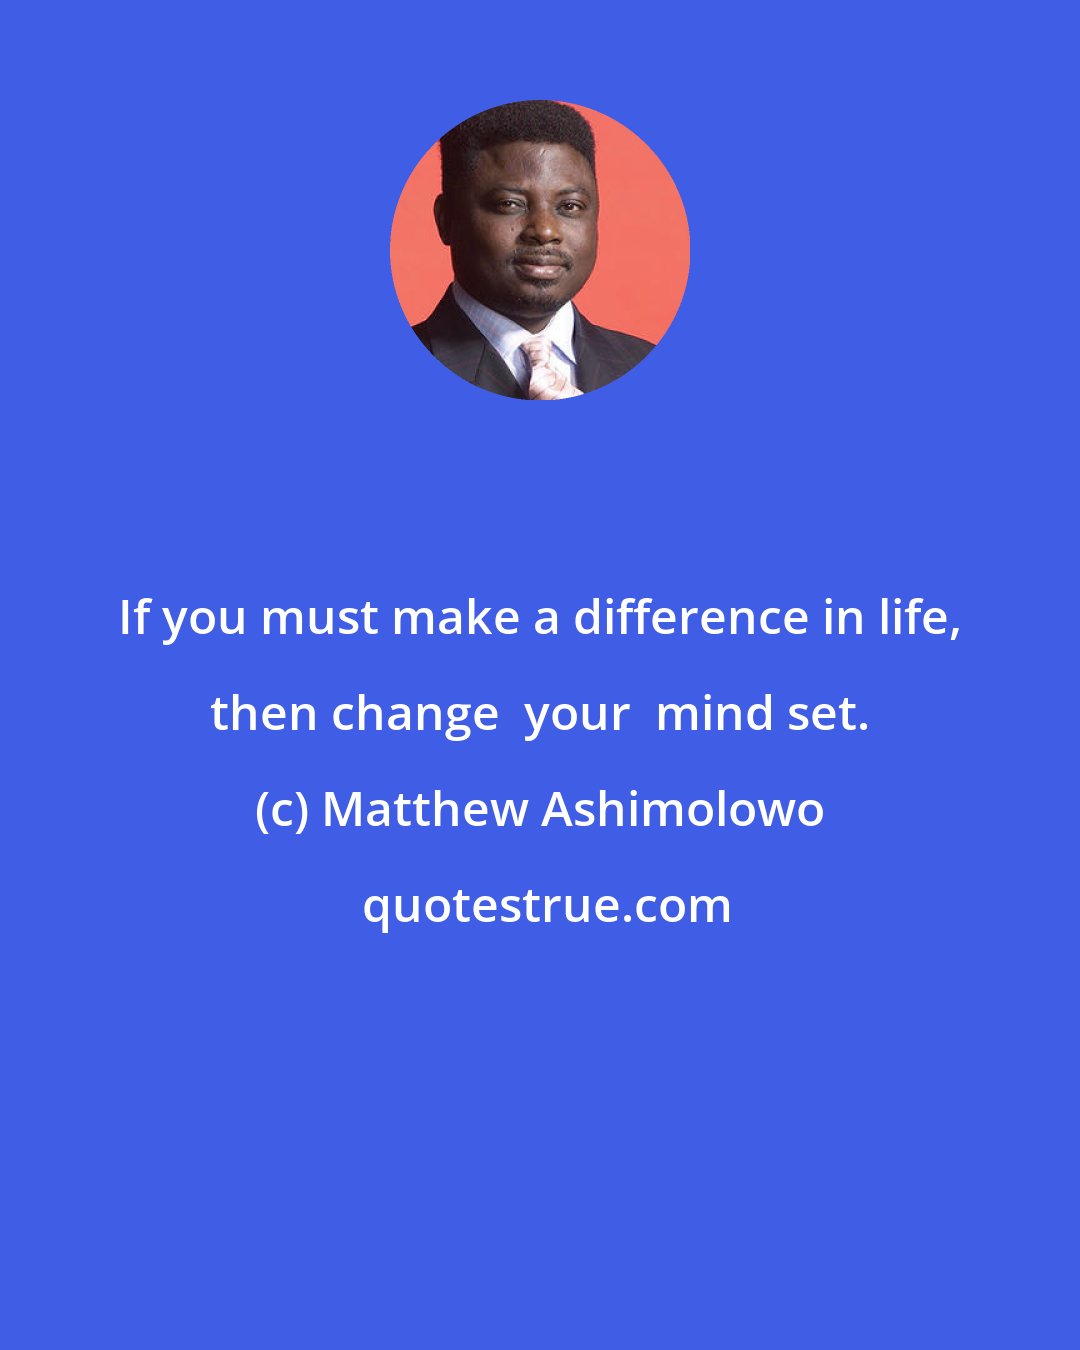 Matthew Ashimolowo: If you must make a difference in life, then change  your  mind set.